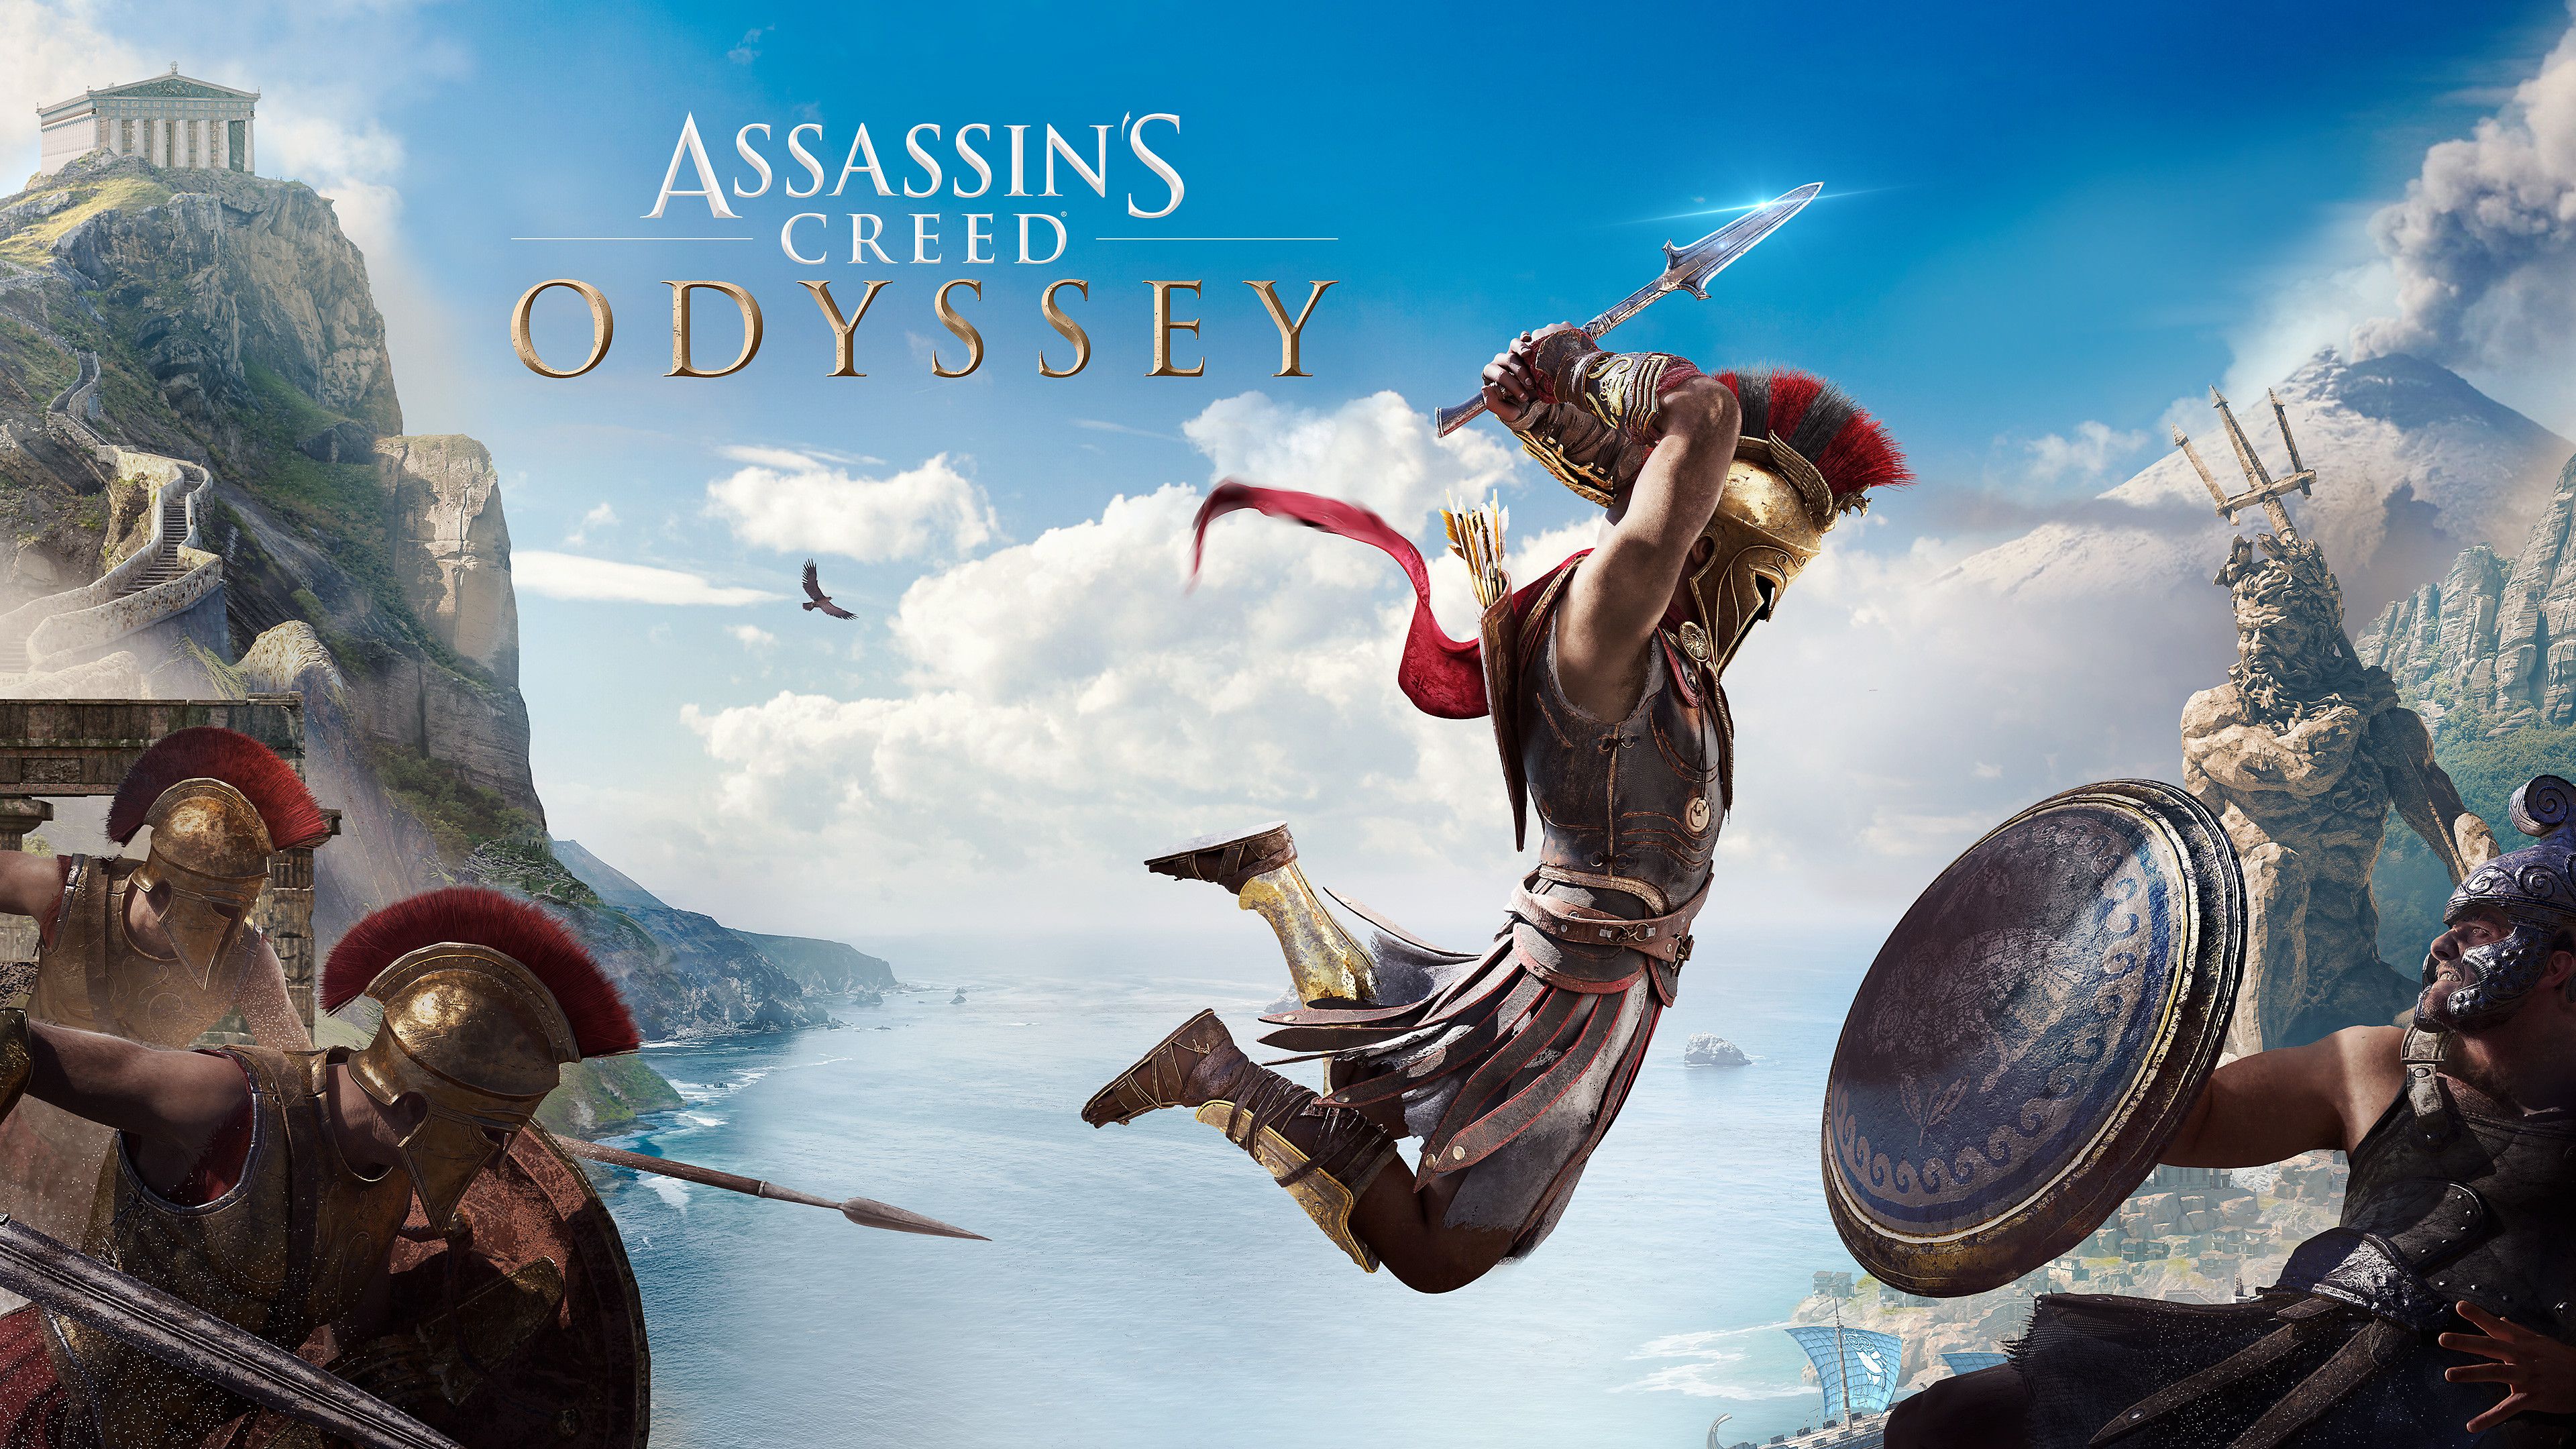 Assassin's Creed Odyssey Wallpaper Free Assassin's Creed Odyssey Background